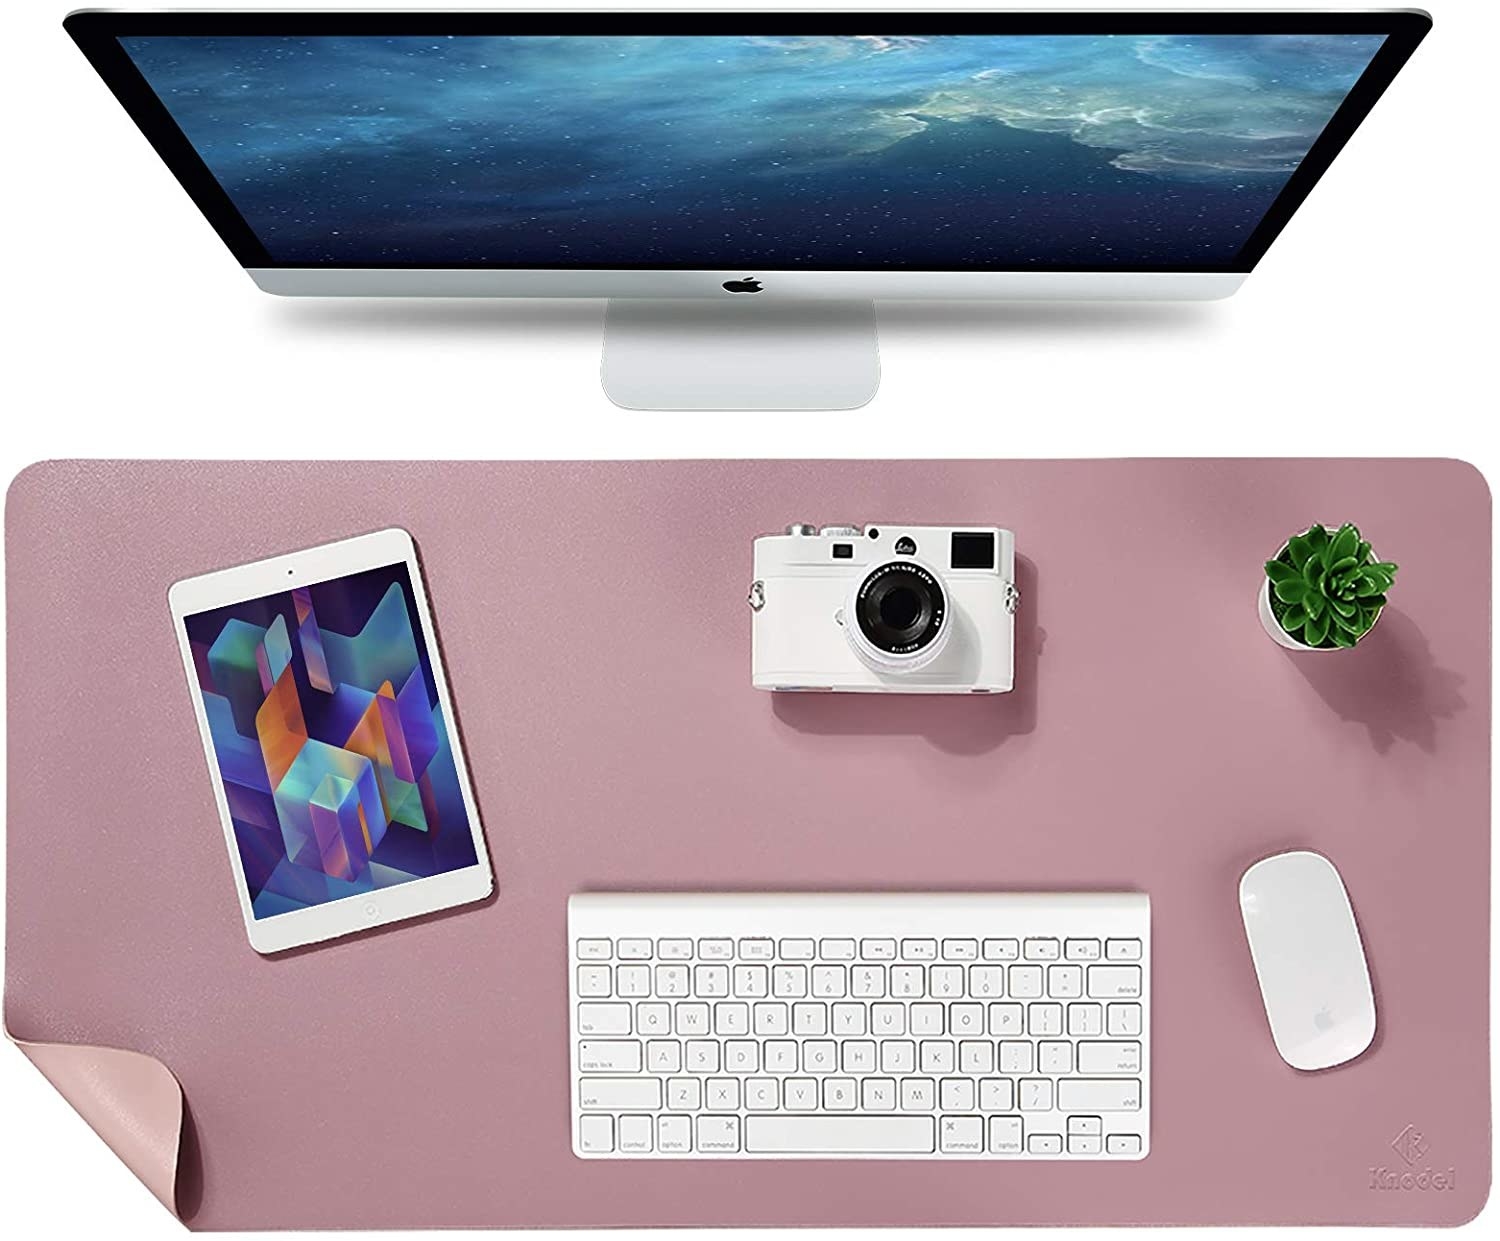 The desk mat in front of a monitor with a keyboard, tablet, mouse, plant, and camera on it